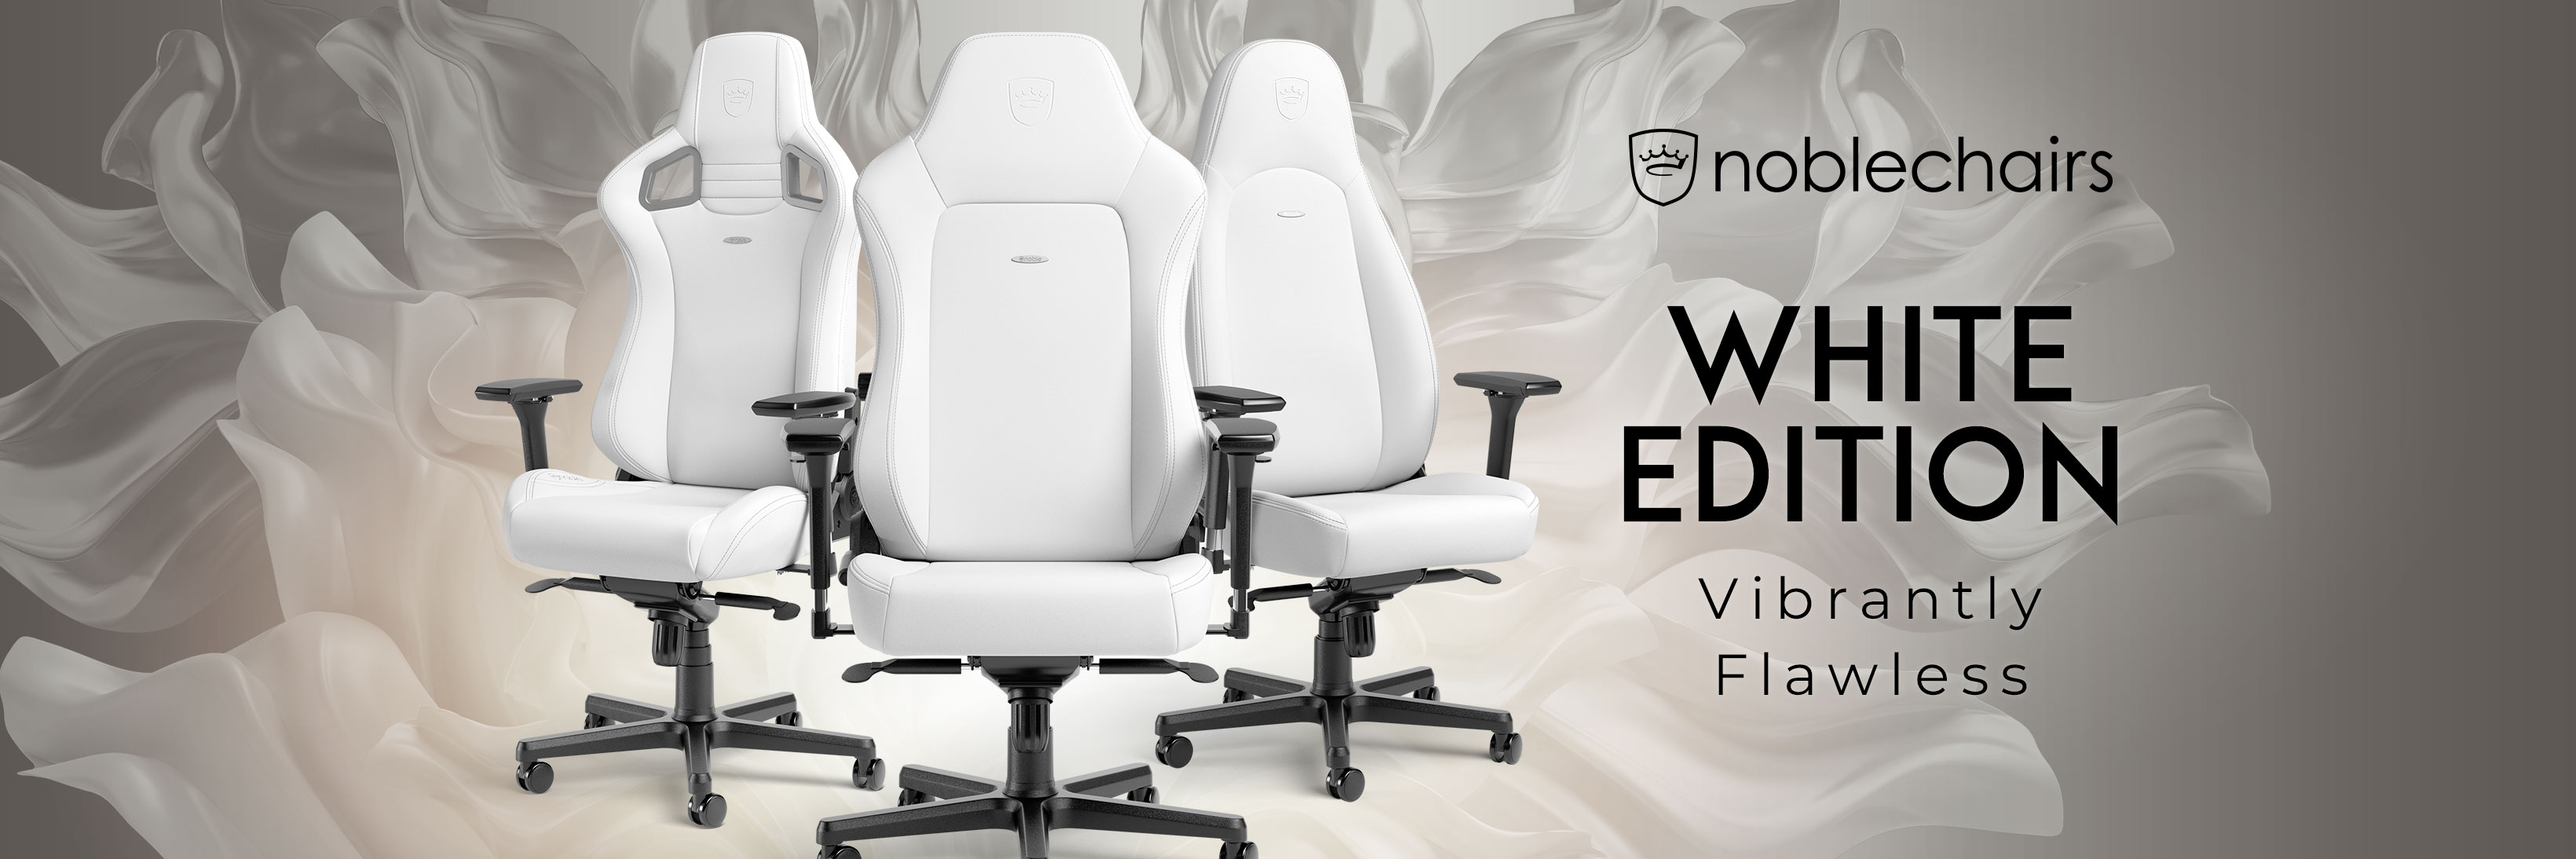 noblechairs White Edition